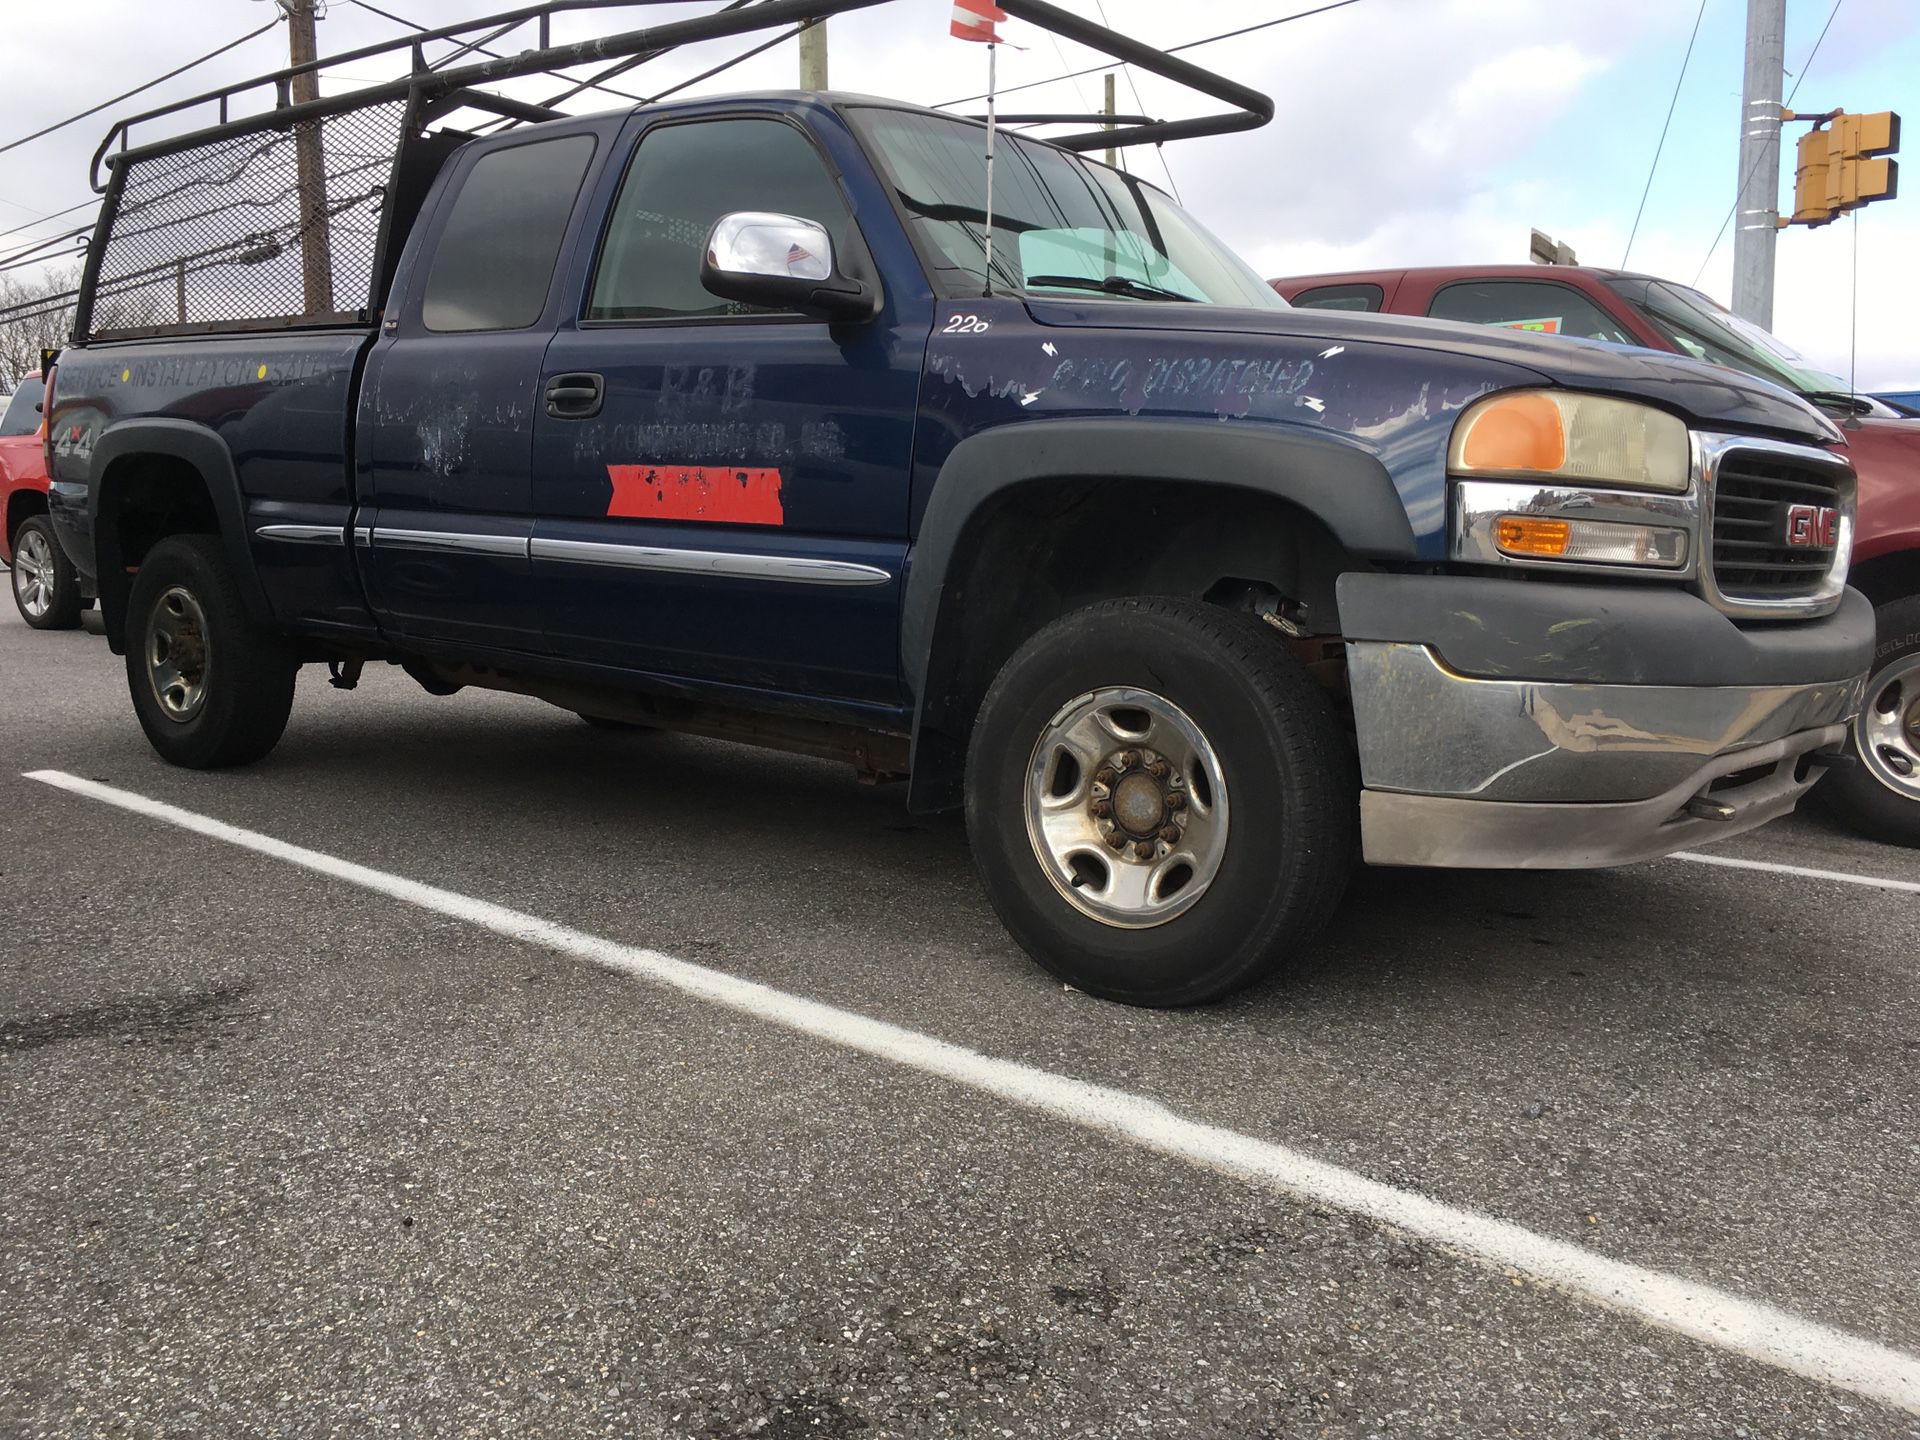 2002 Chevy Silverado extended cab 4dr 4x4 Ls with lift gate clean inside an out $3300